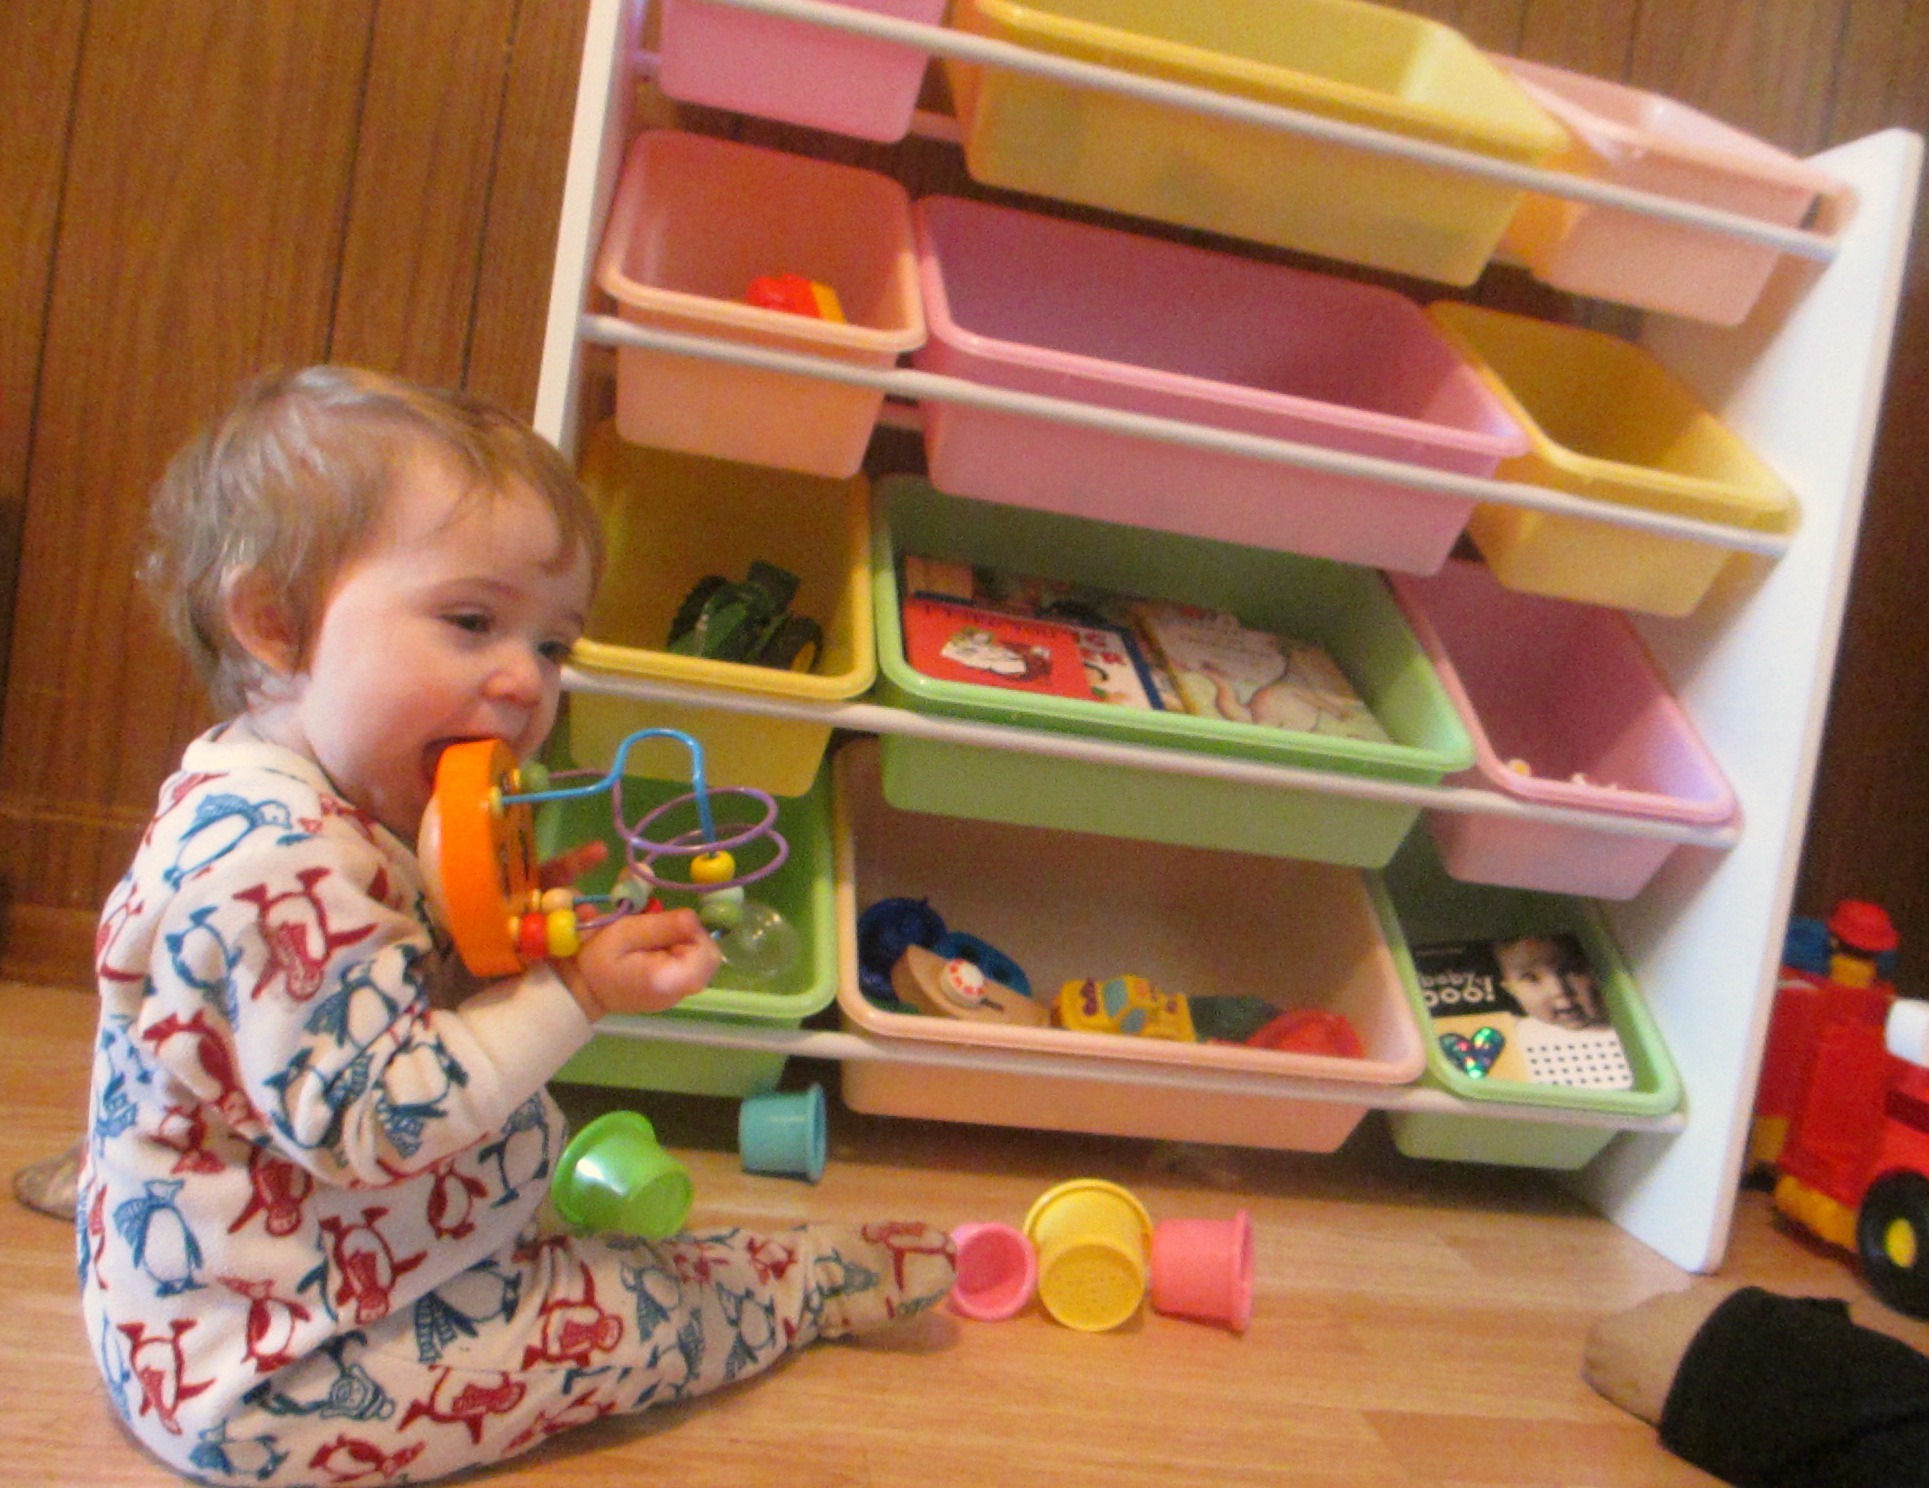 Tips For Keeping Little Ones Organized